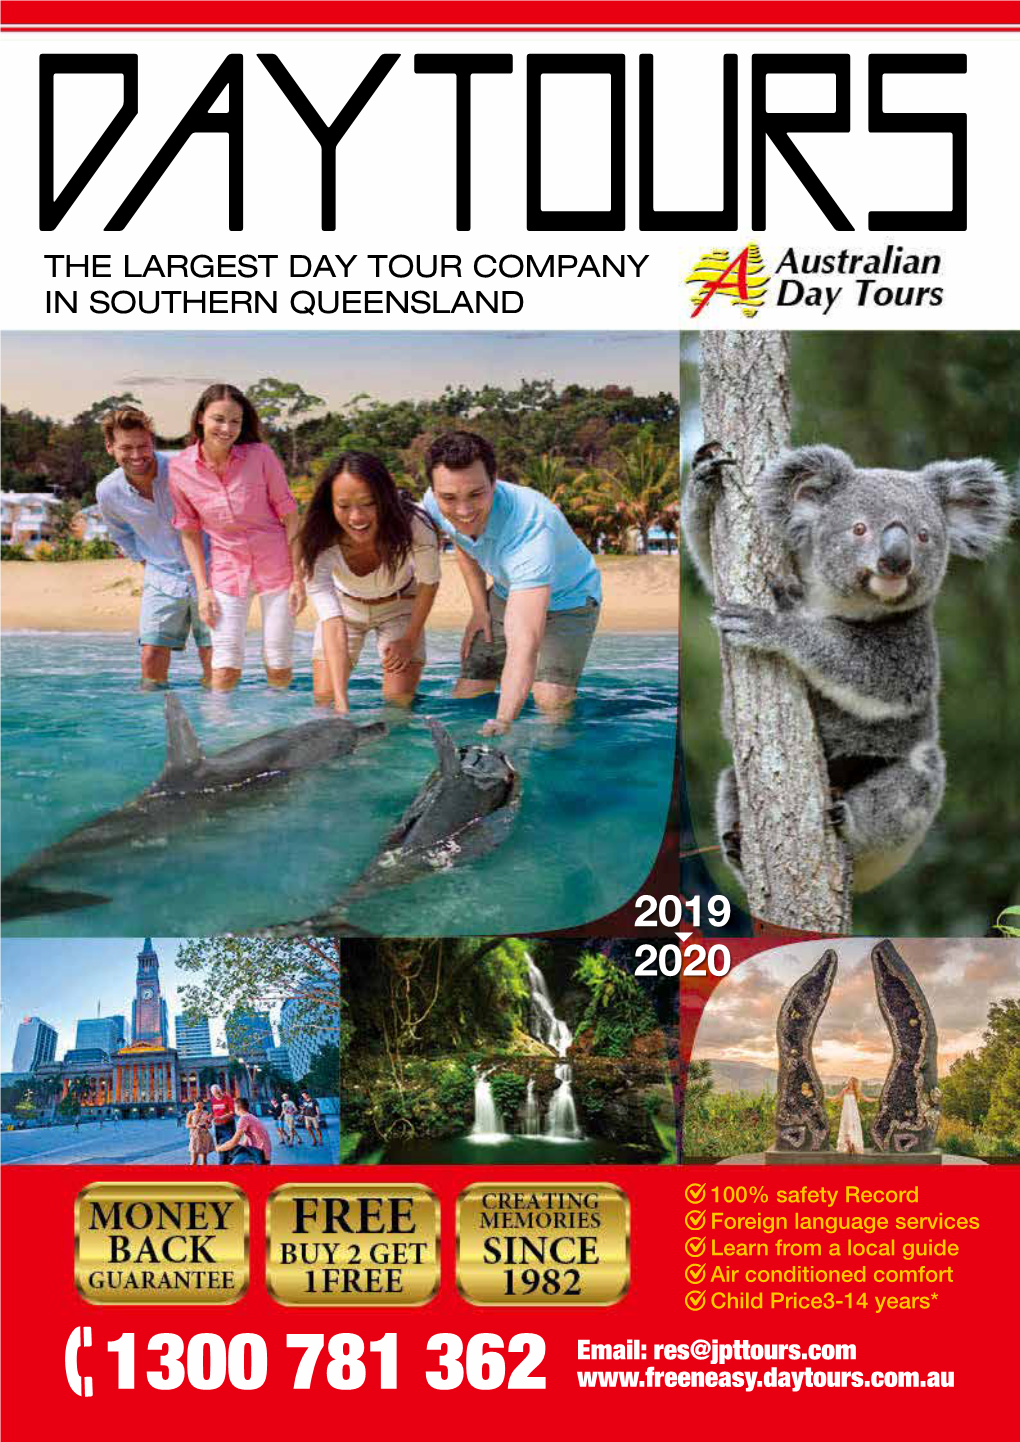 The Largest Day Tour Company in Southern Queensland